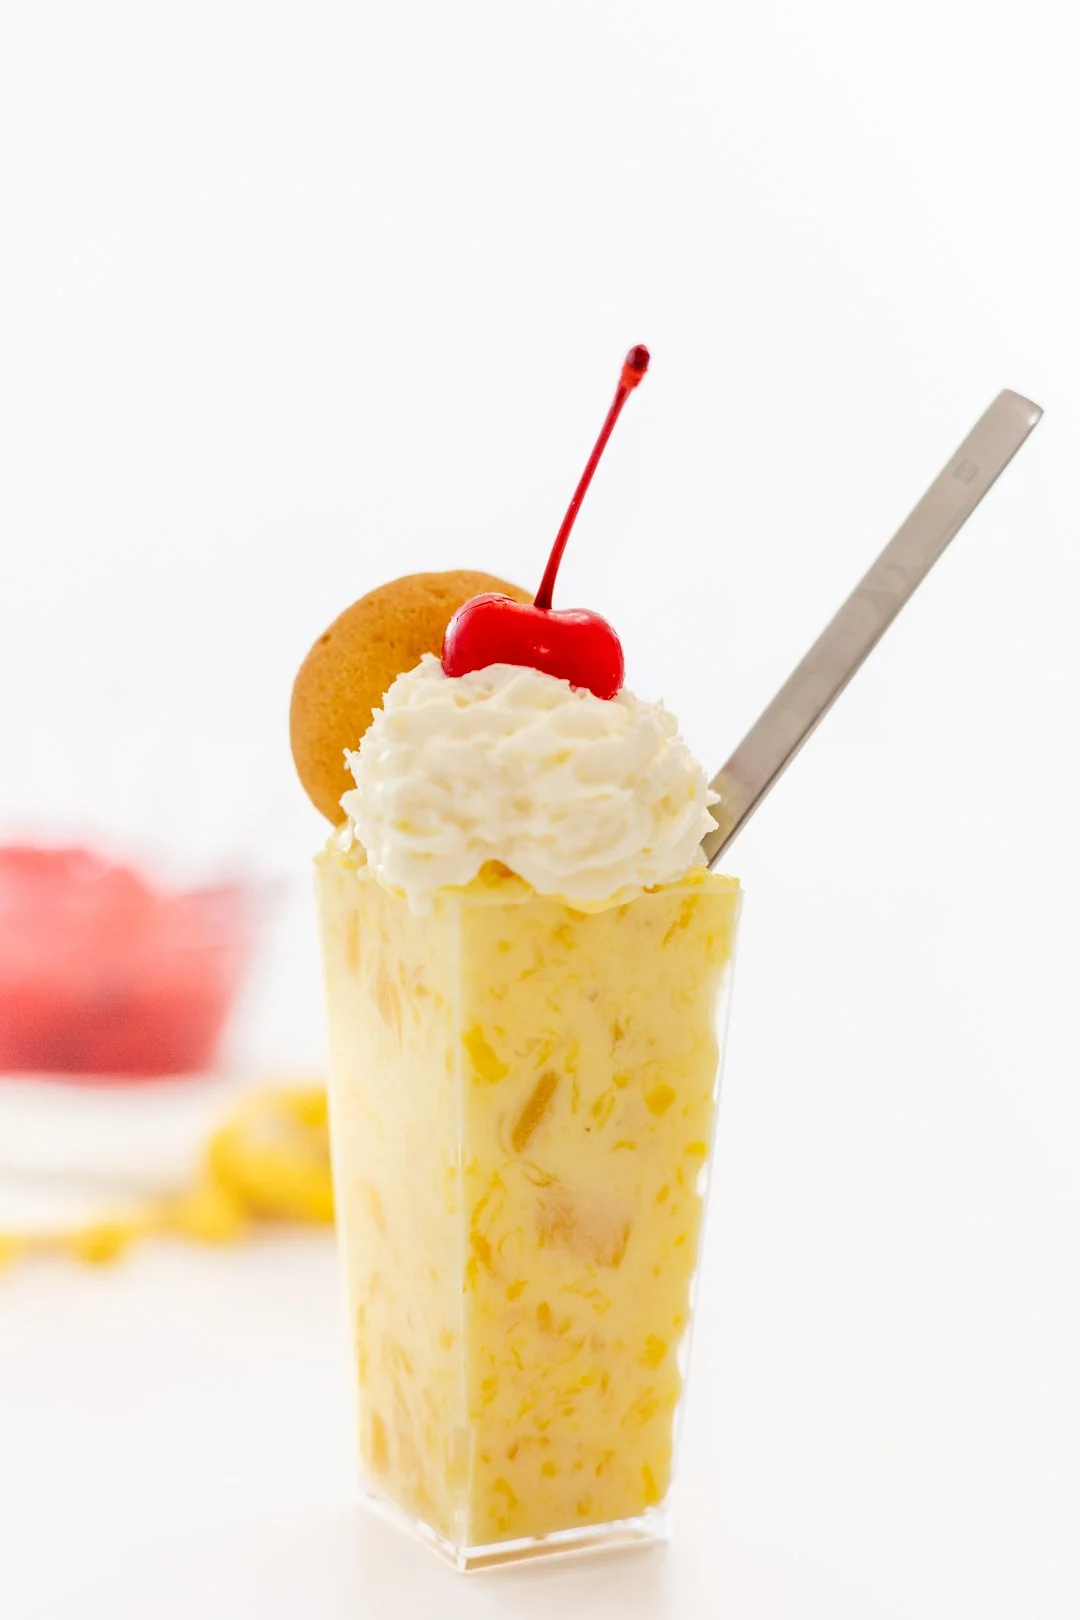 Pineapple Pudding with Whipped Cream, Nilla Wafer and Cherry Garnish.